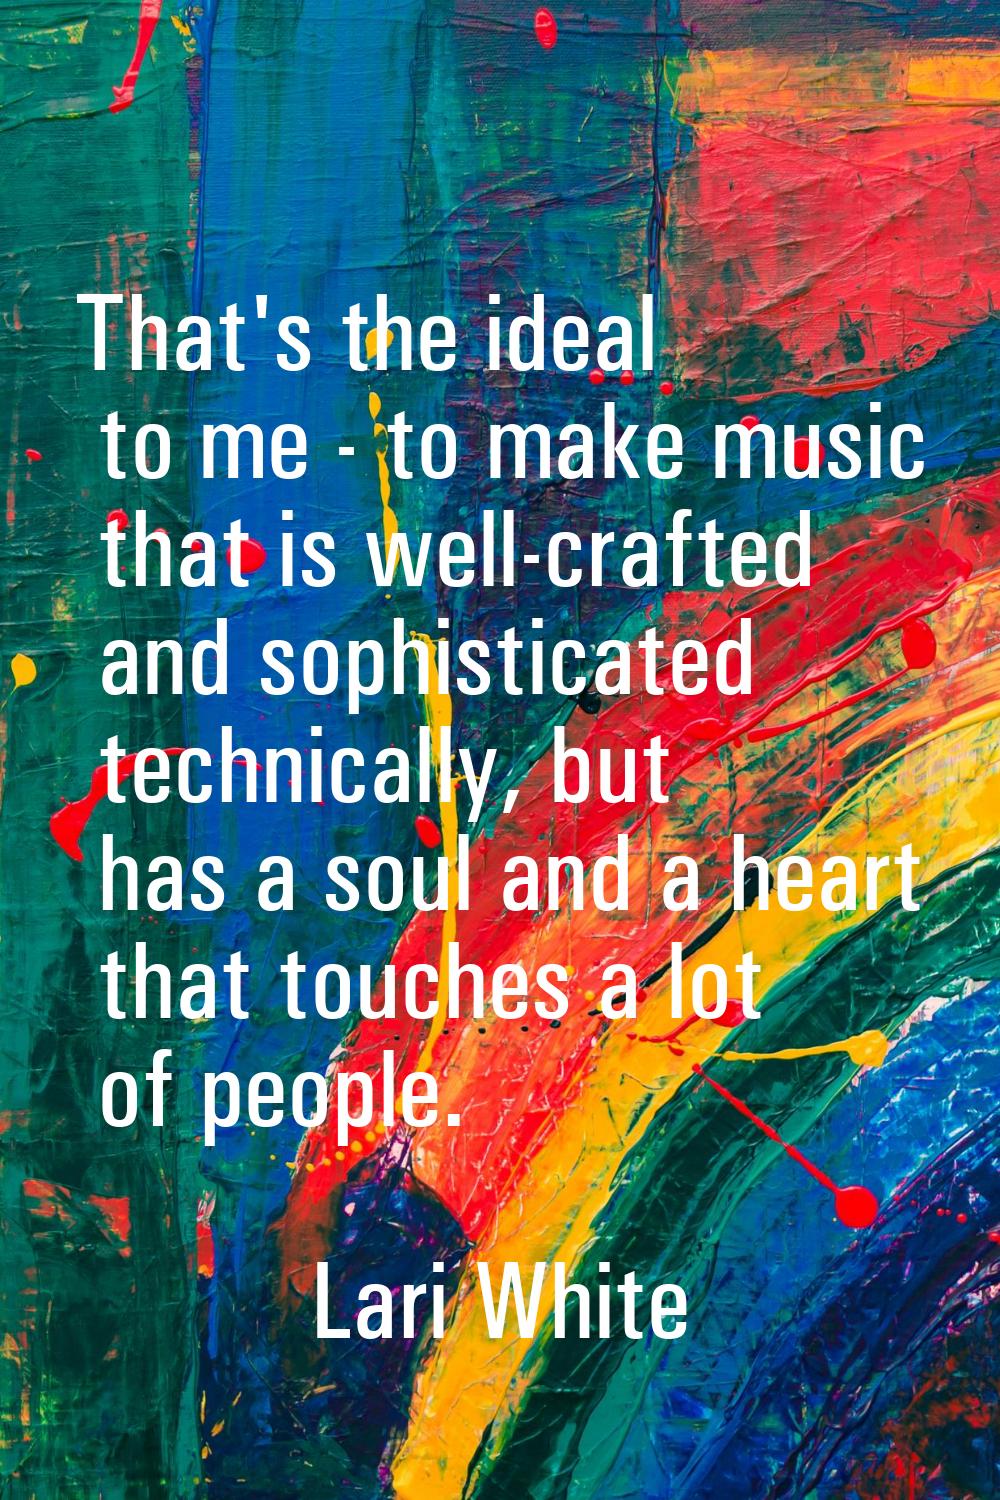 That's the ideal to me - to make music that is well-crafted and sophisticated technically, but has 